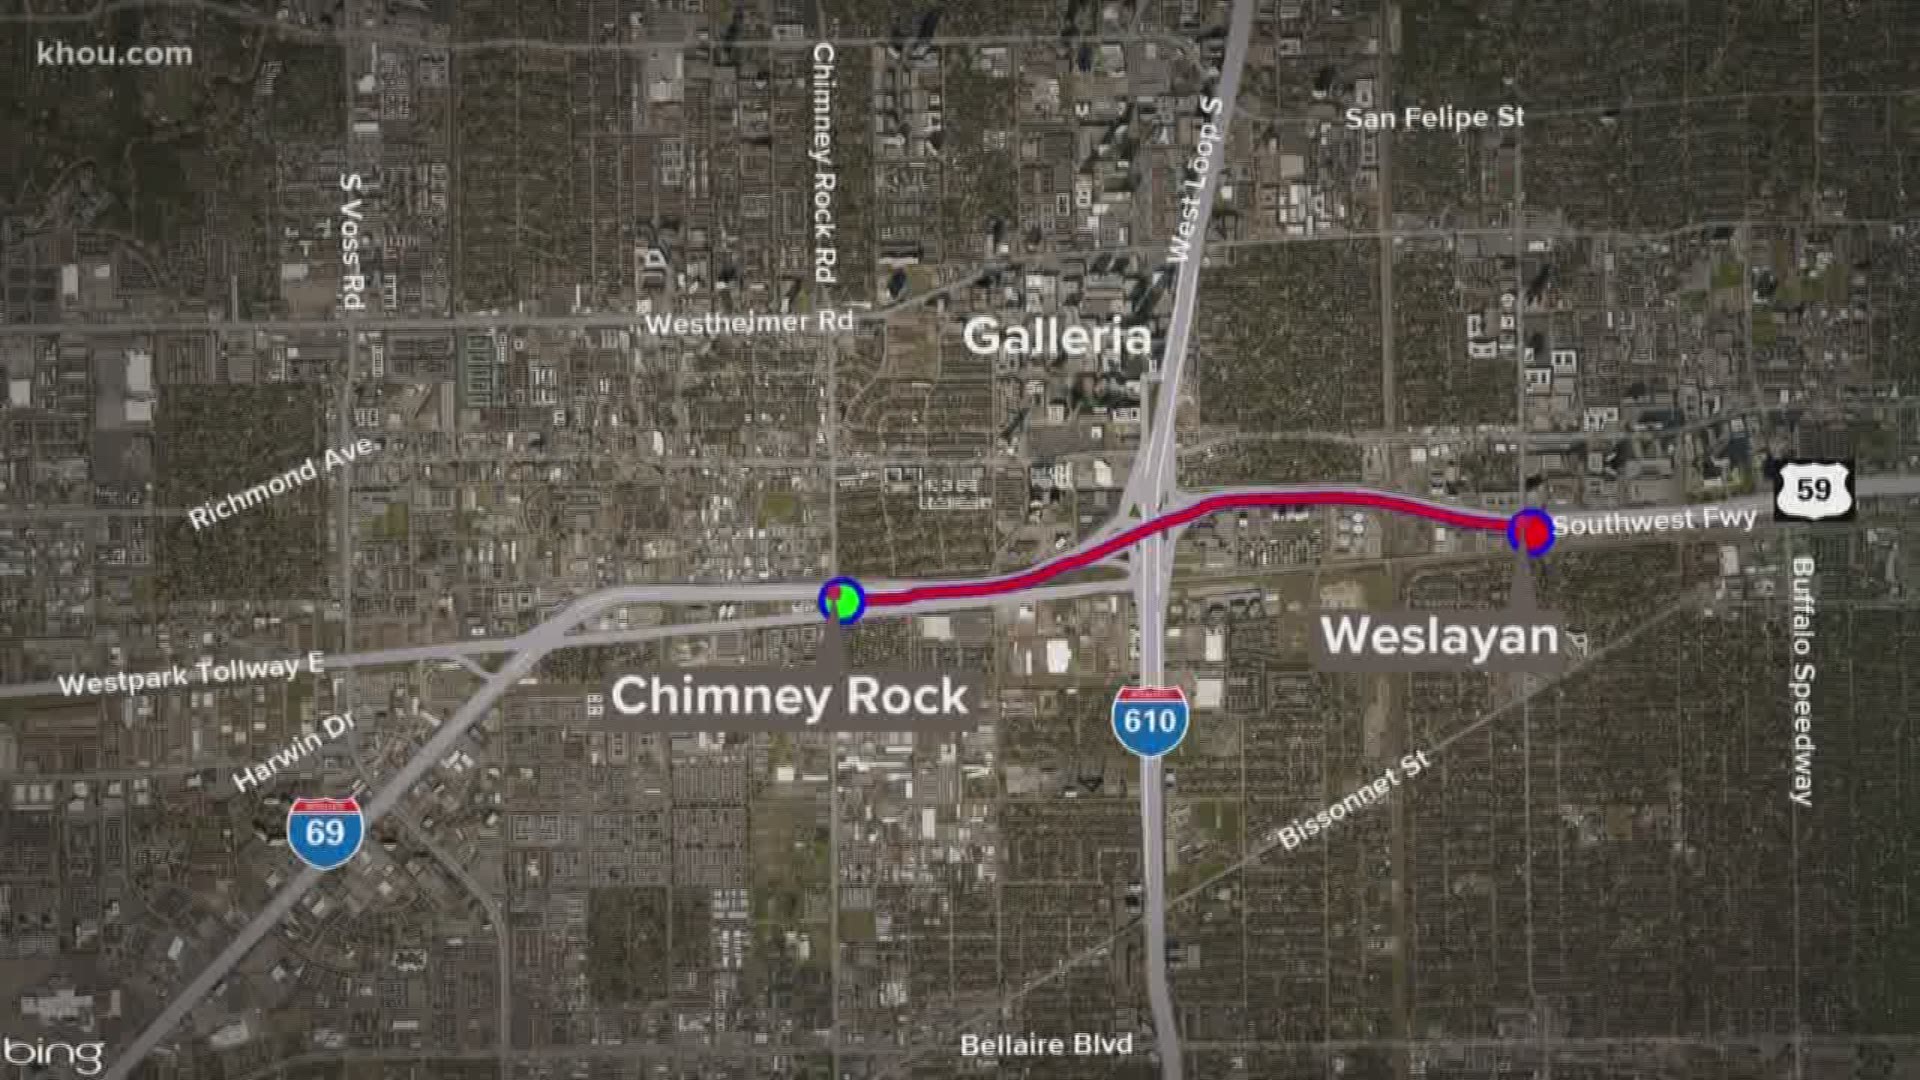 Drivers who take Highway 59 into downtown Houston may want to alter their route next week.